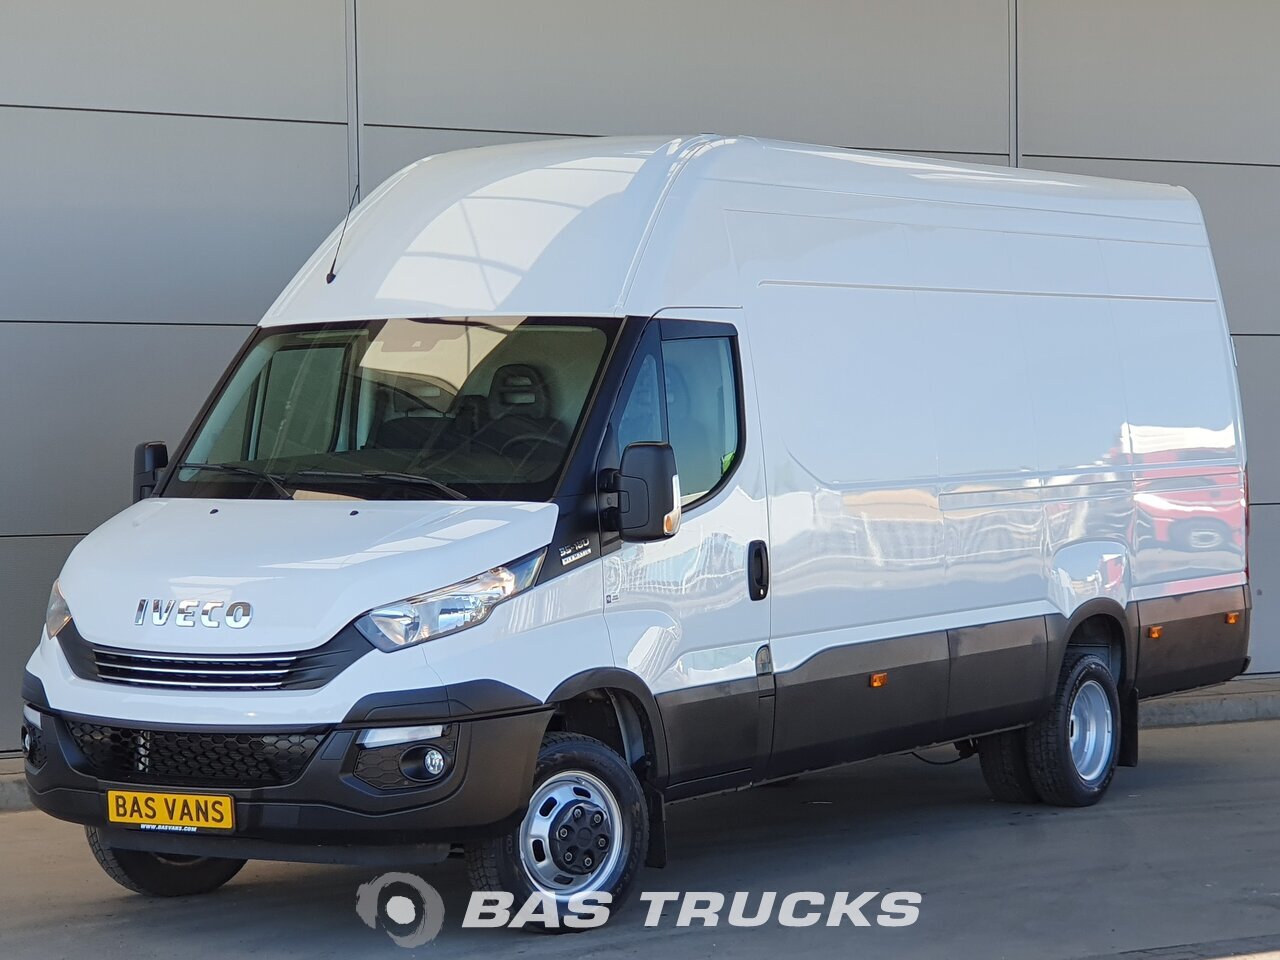 iveco daily van for sale